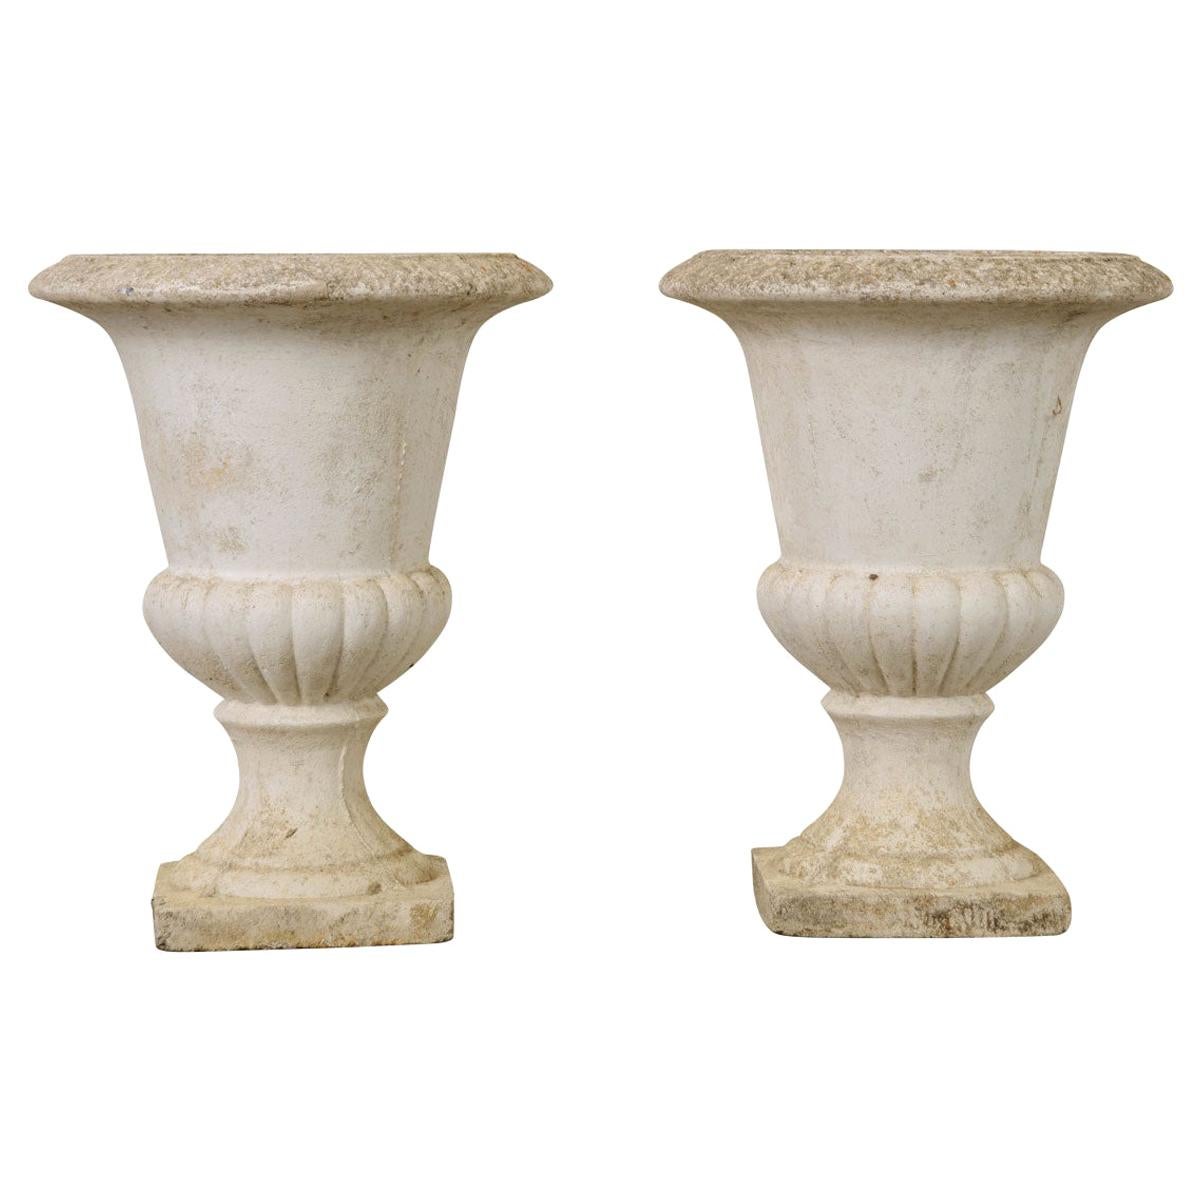 Pair of Early 20th Century French Cast Stone Planters